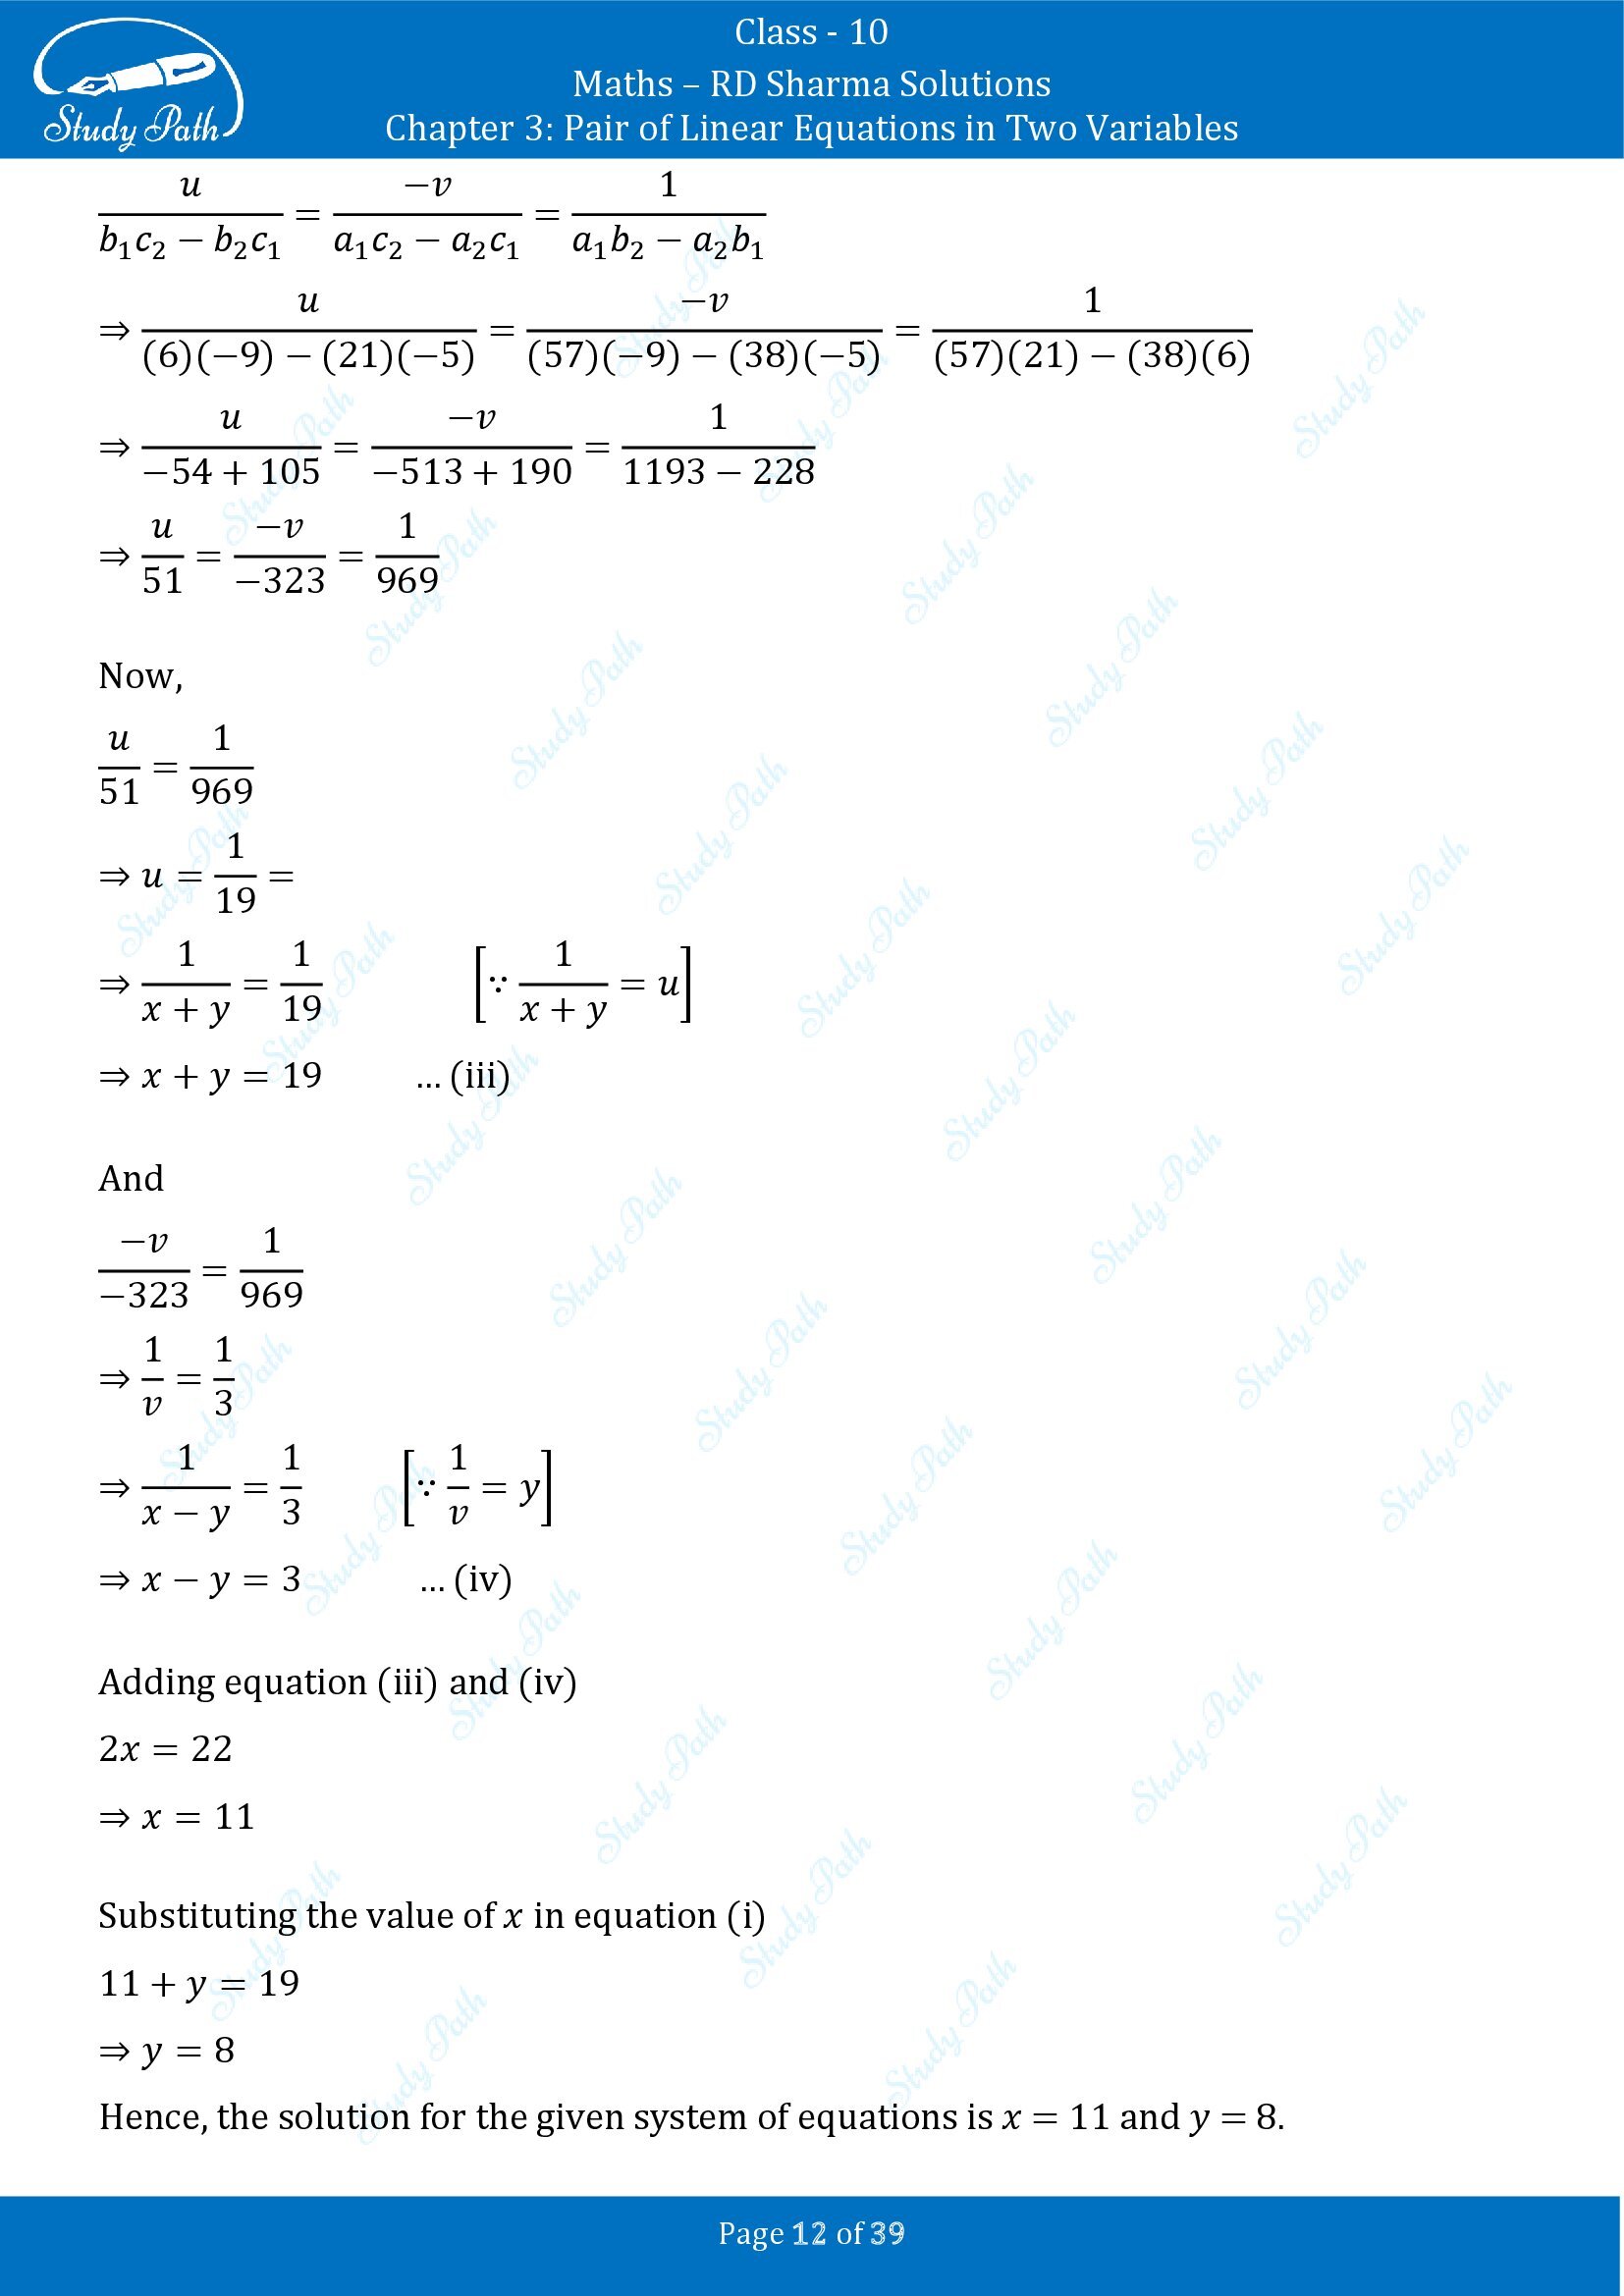 RD Sharma Solutions Class 10 Chapter 3 Pair of Linear Equations in Two Variables Exercise 3.4 00012